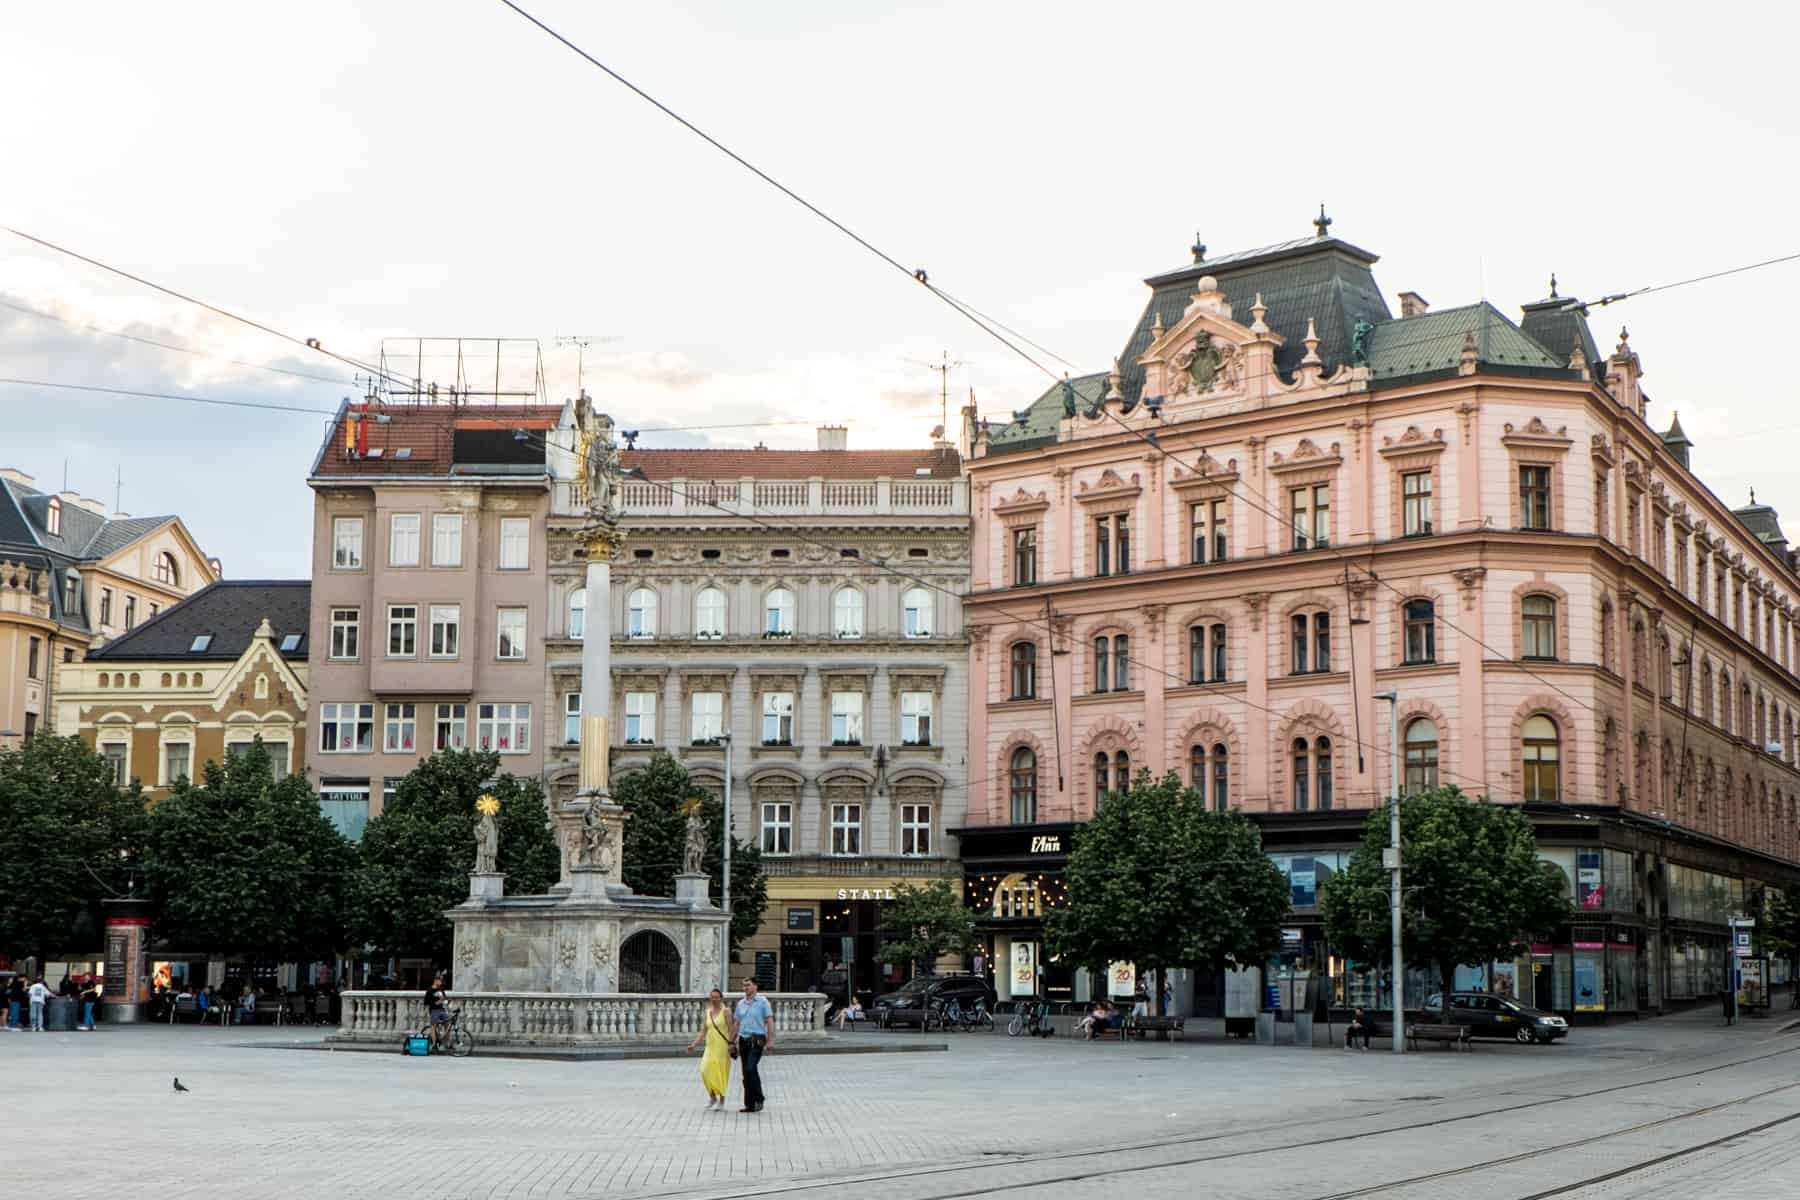 A woman in a yellow dress and a man in a blue shirt walk past a columned fountain in Brno's Freedom Square, in front a large classic looking buildings in varying shades of pink. 